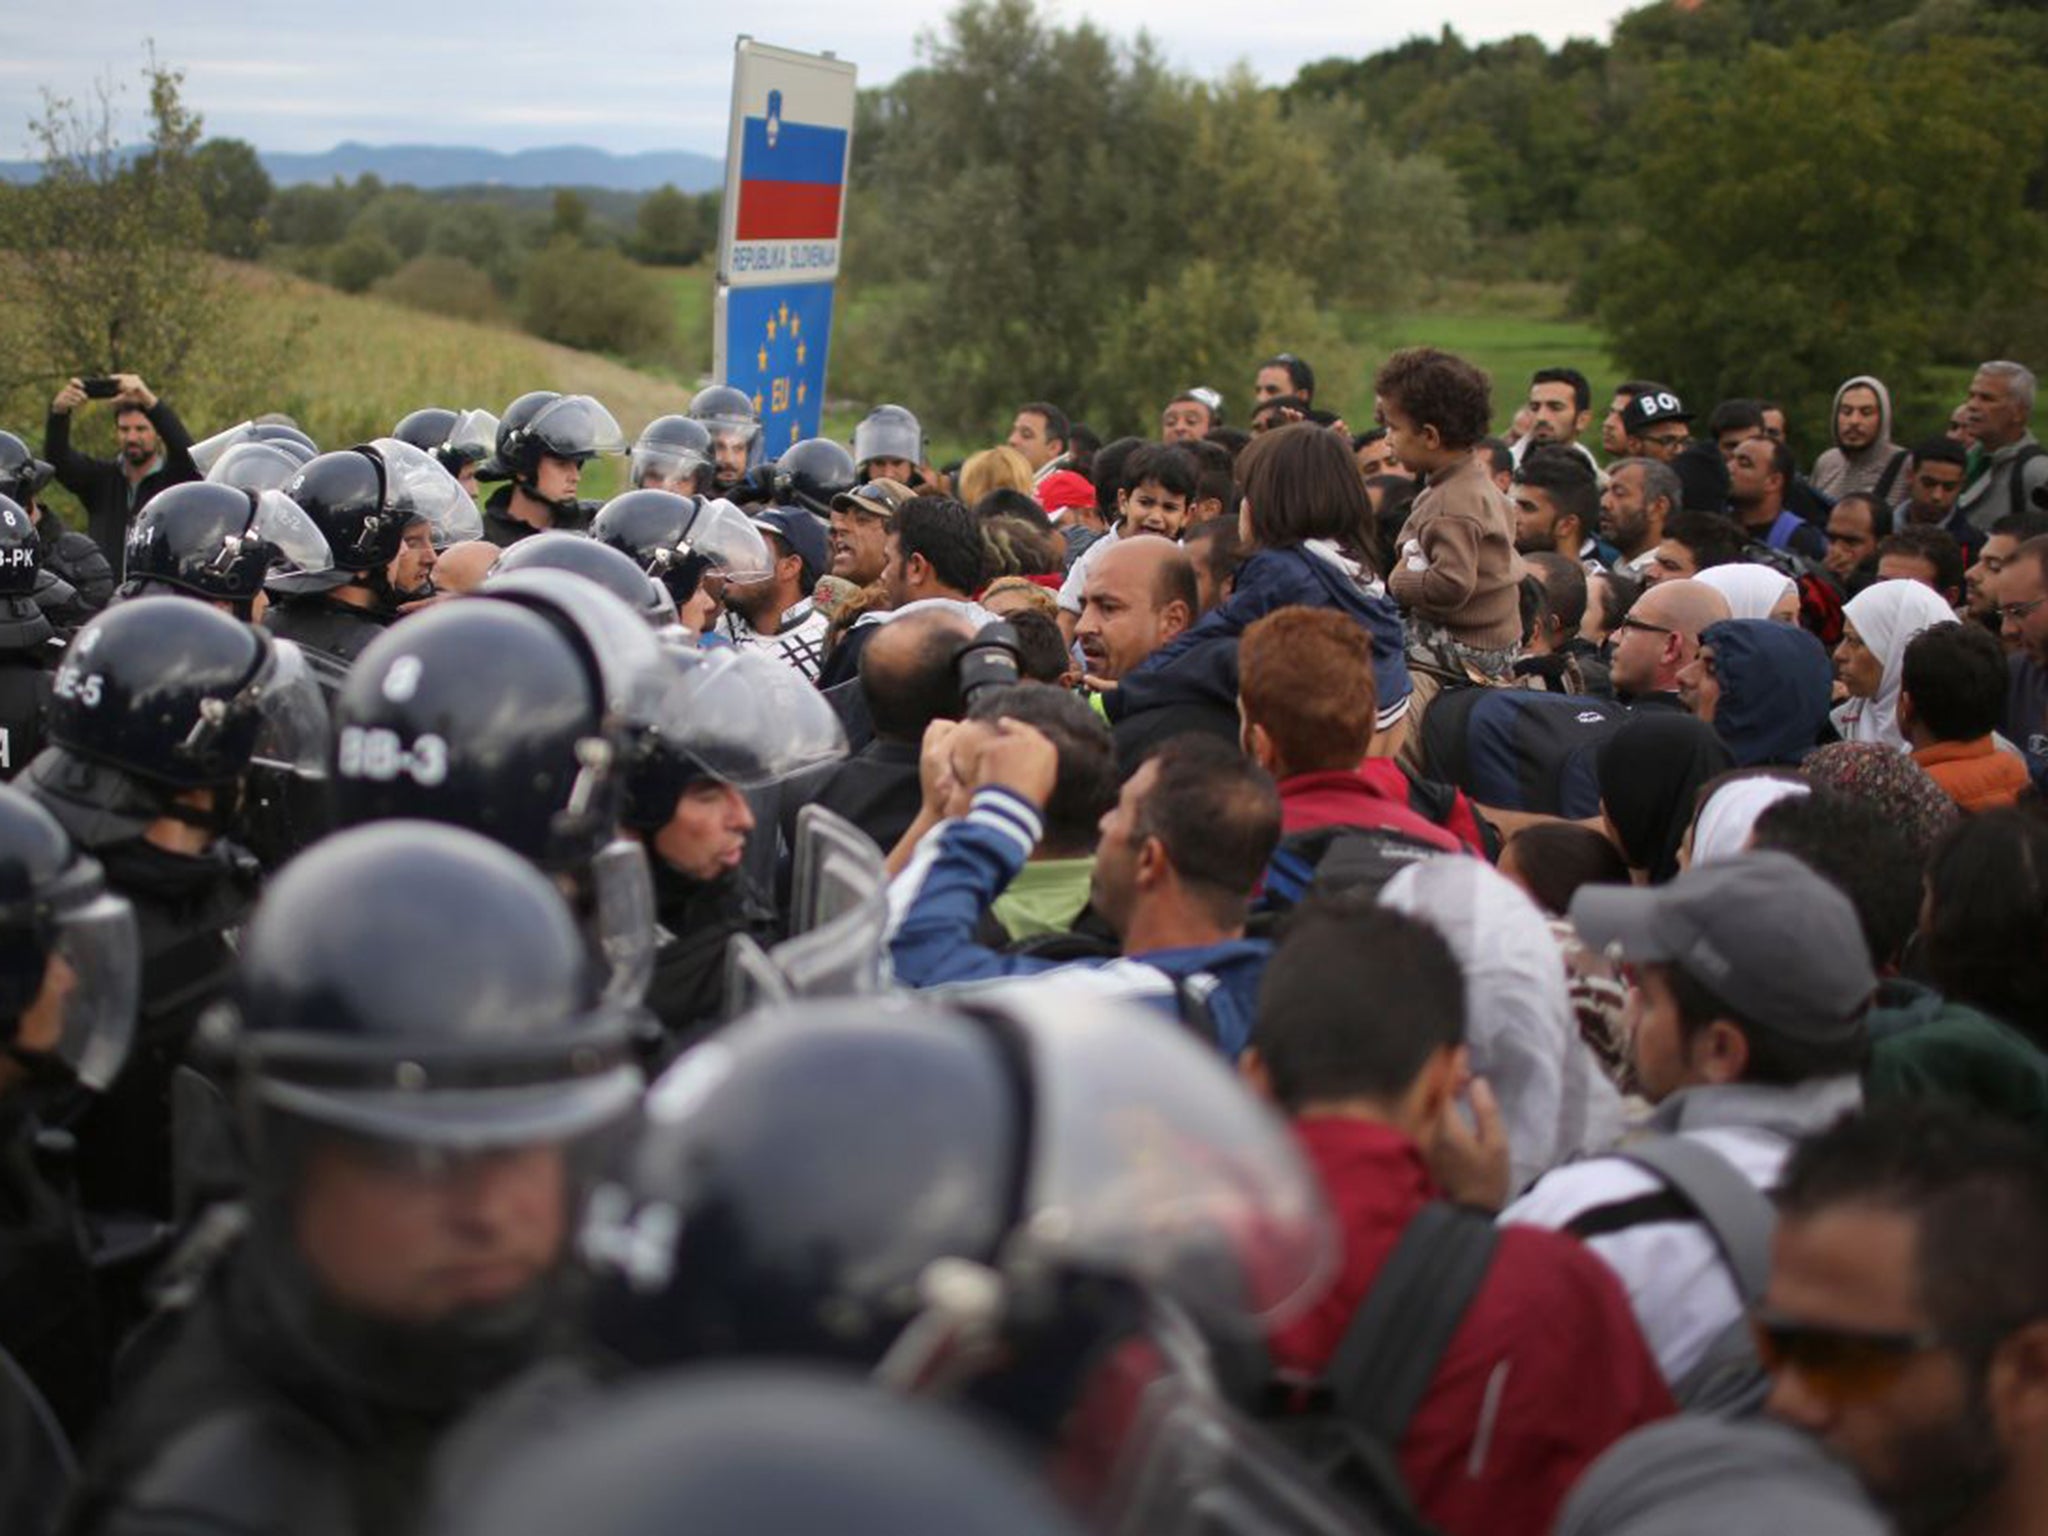 Refugees face police in Croatia where demonstrations turned ugly after some plastic bottles were thrown at the police, who responded by firing pepper spray into the crowd